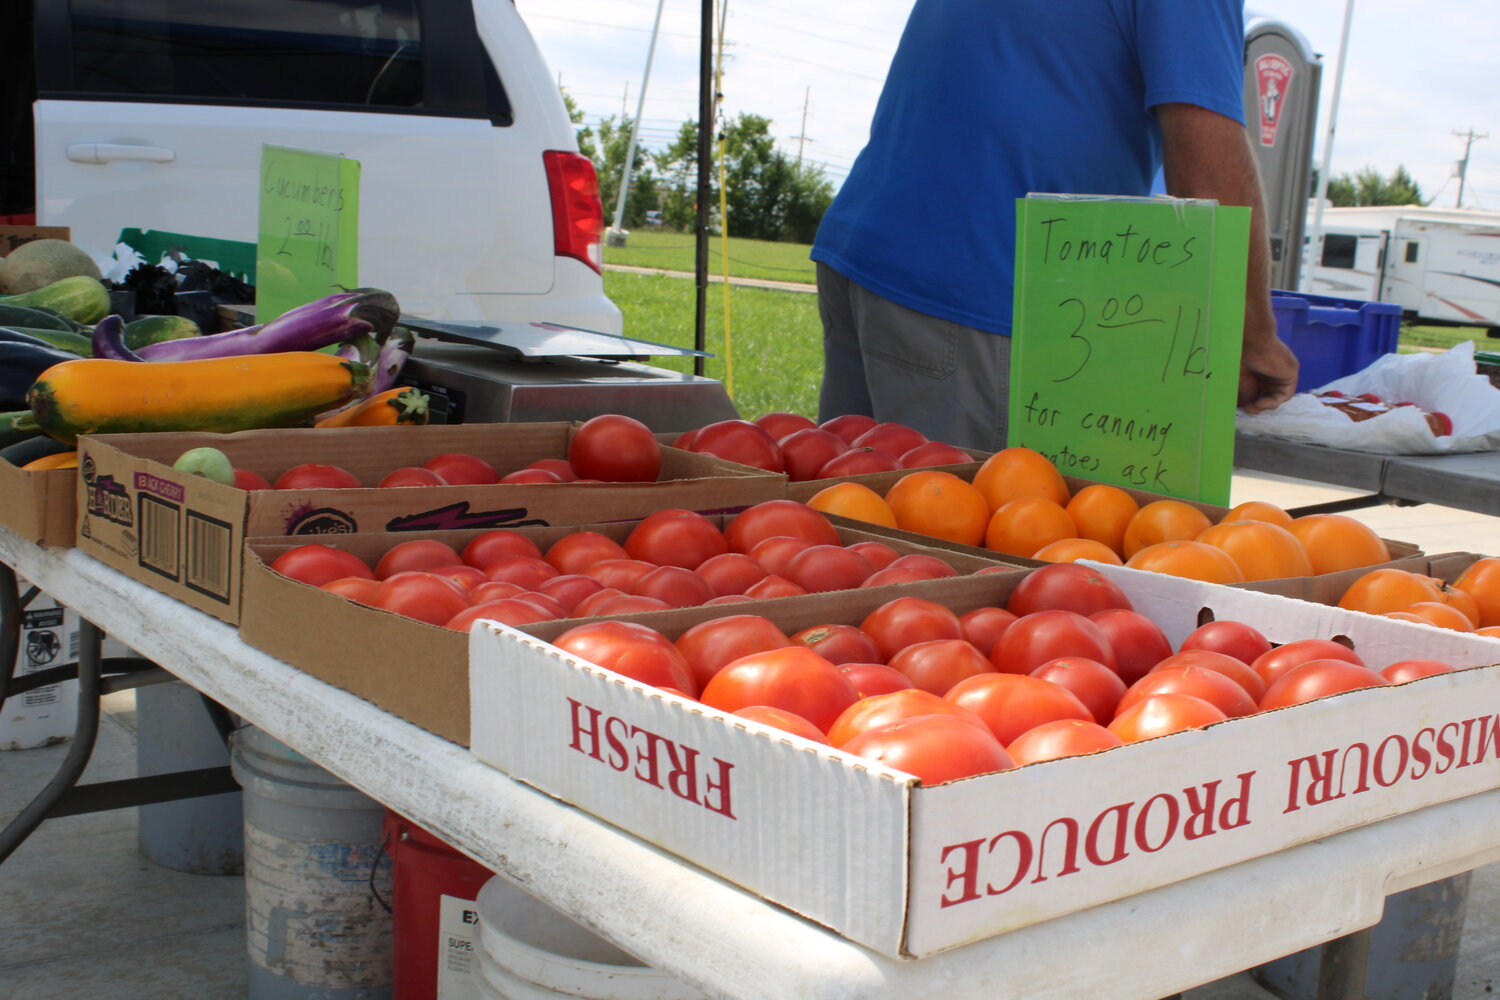 John Kopmann had a number of tomatoes for sale at the Aug. 1 market.